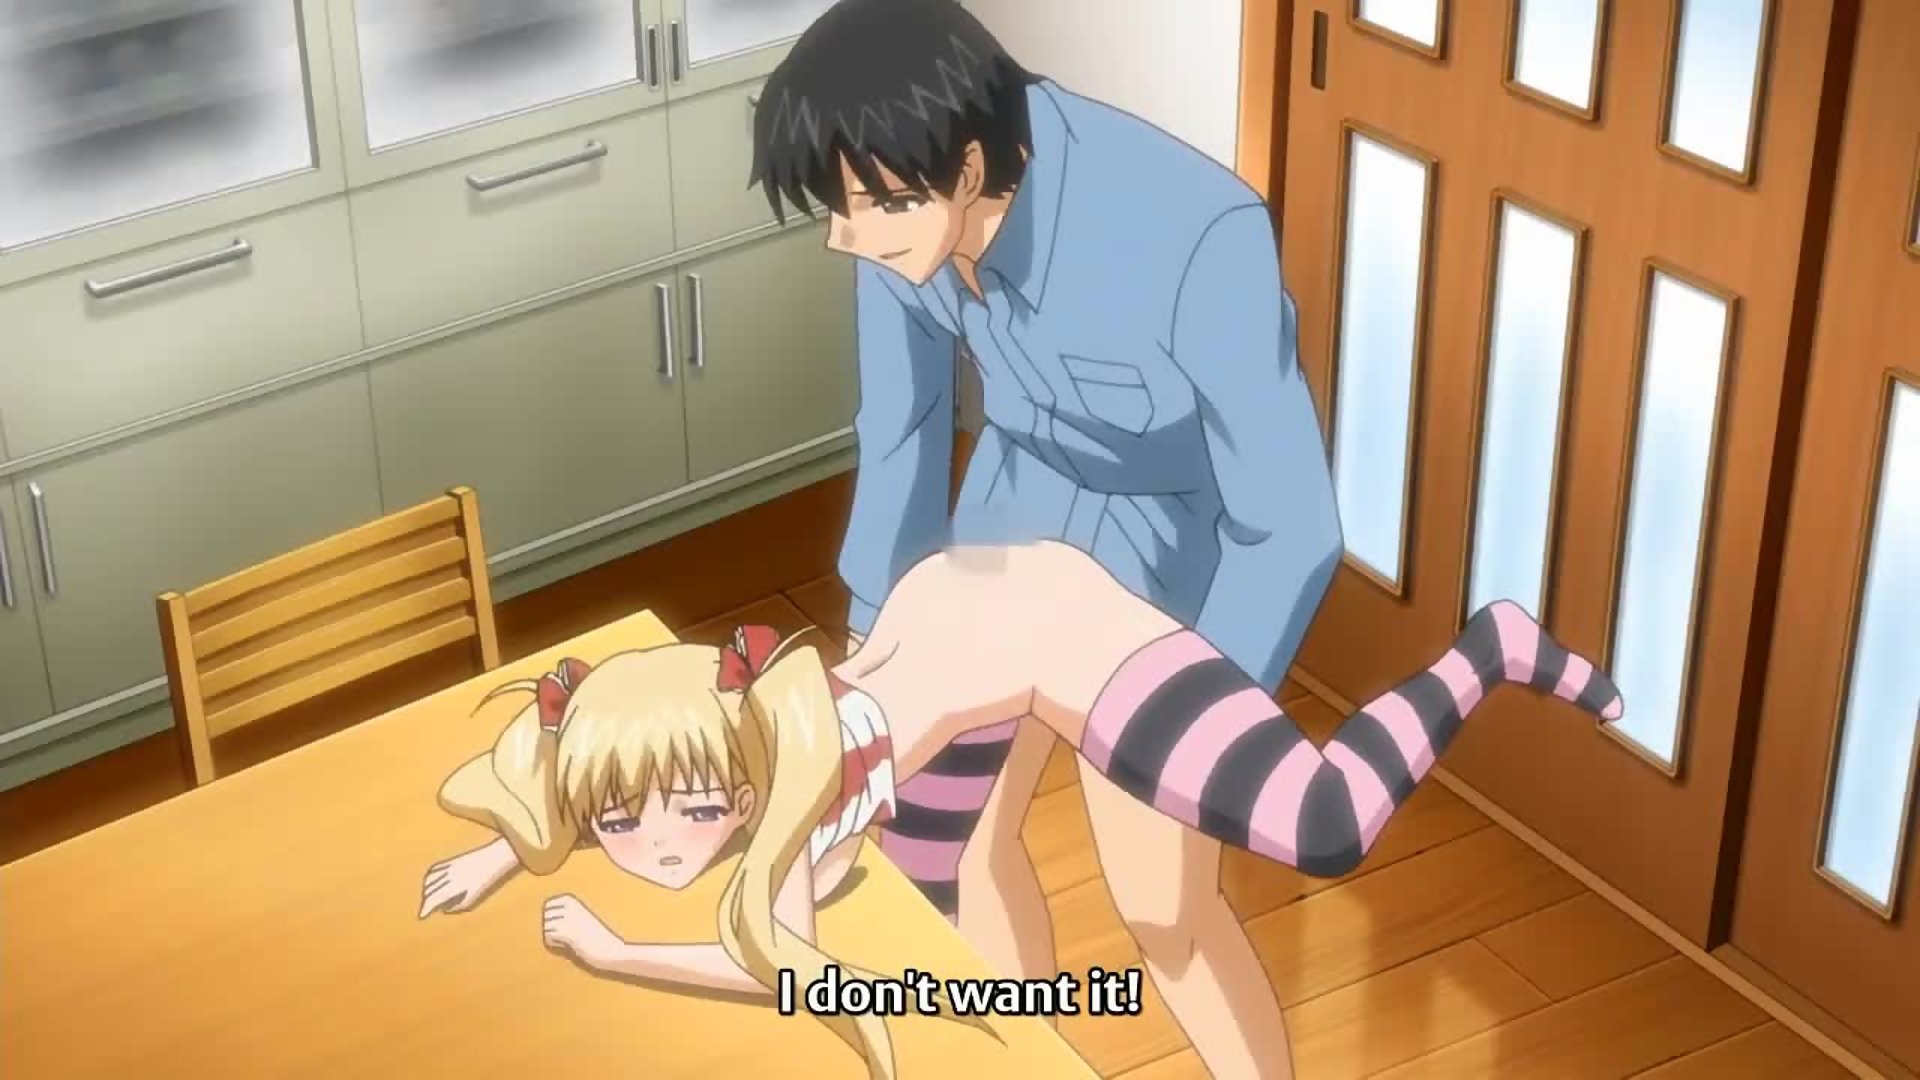 1920px x 1080px - Demon Father 1 - Cute blonde teen gets fucked by perverted father - Hentai  City